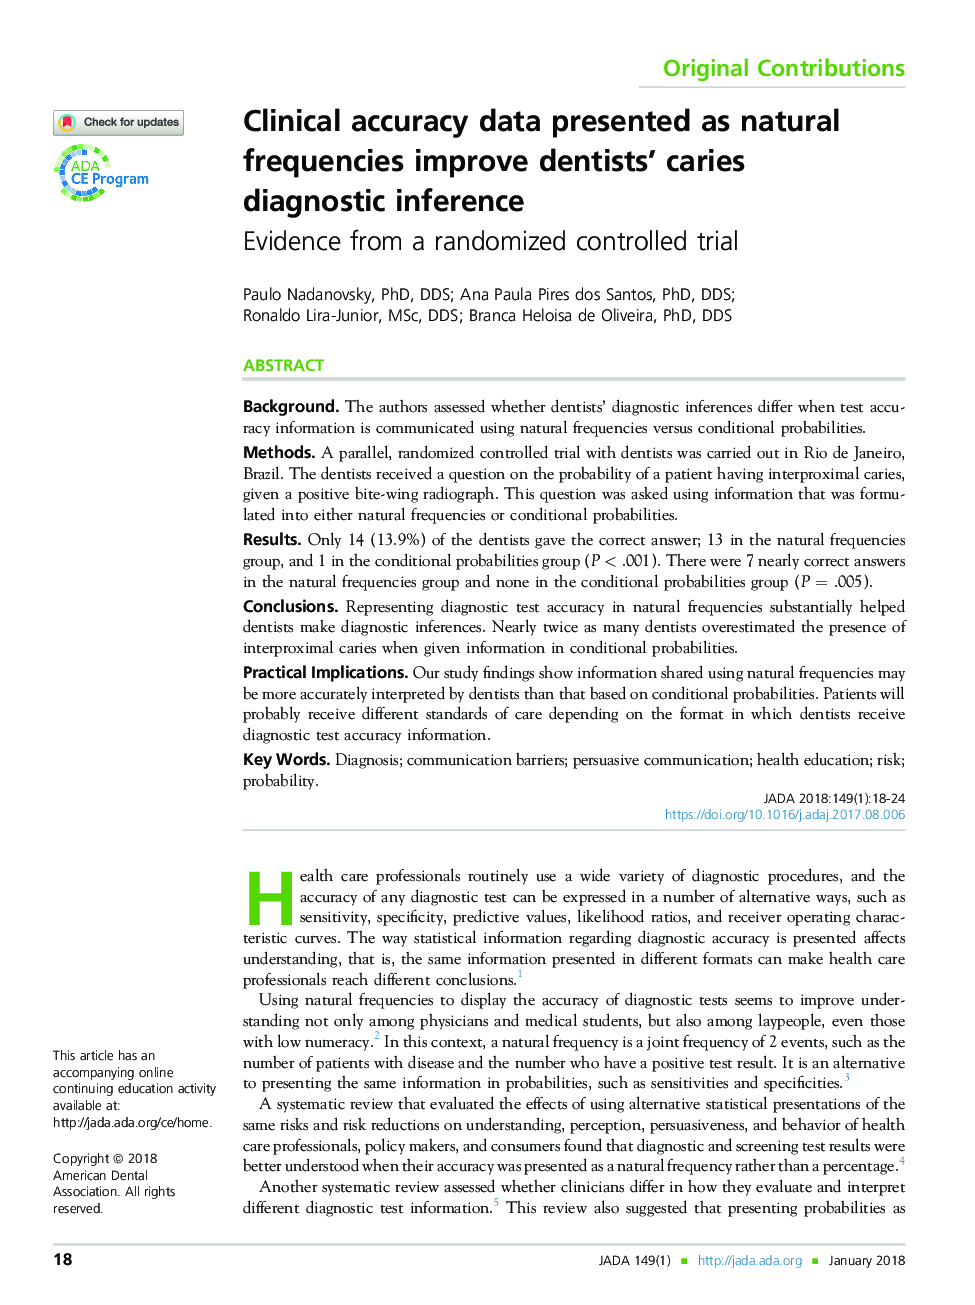 Clinical accuracy data presented as natural frequencies improve dentists' caries diagnostic inference